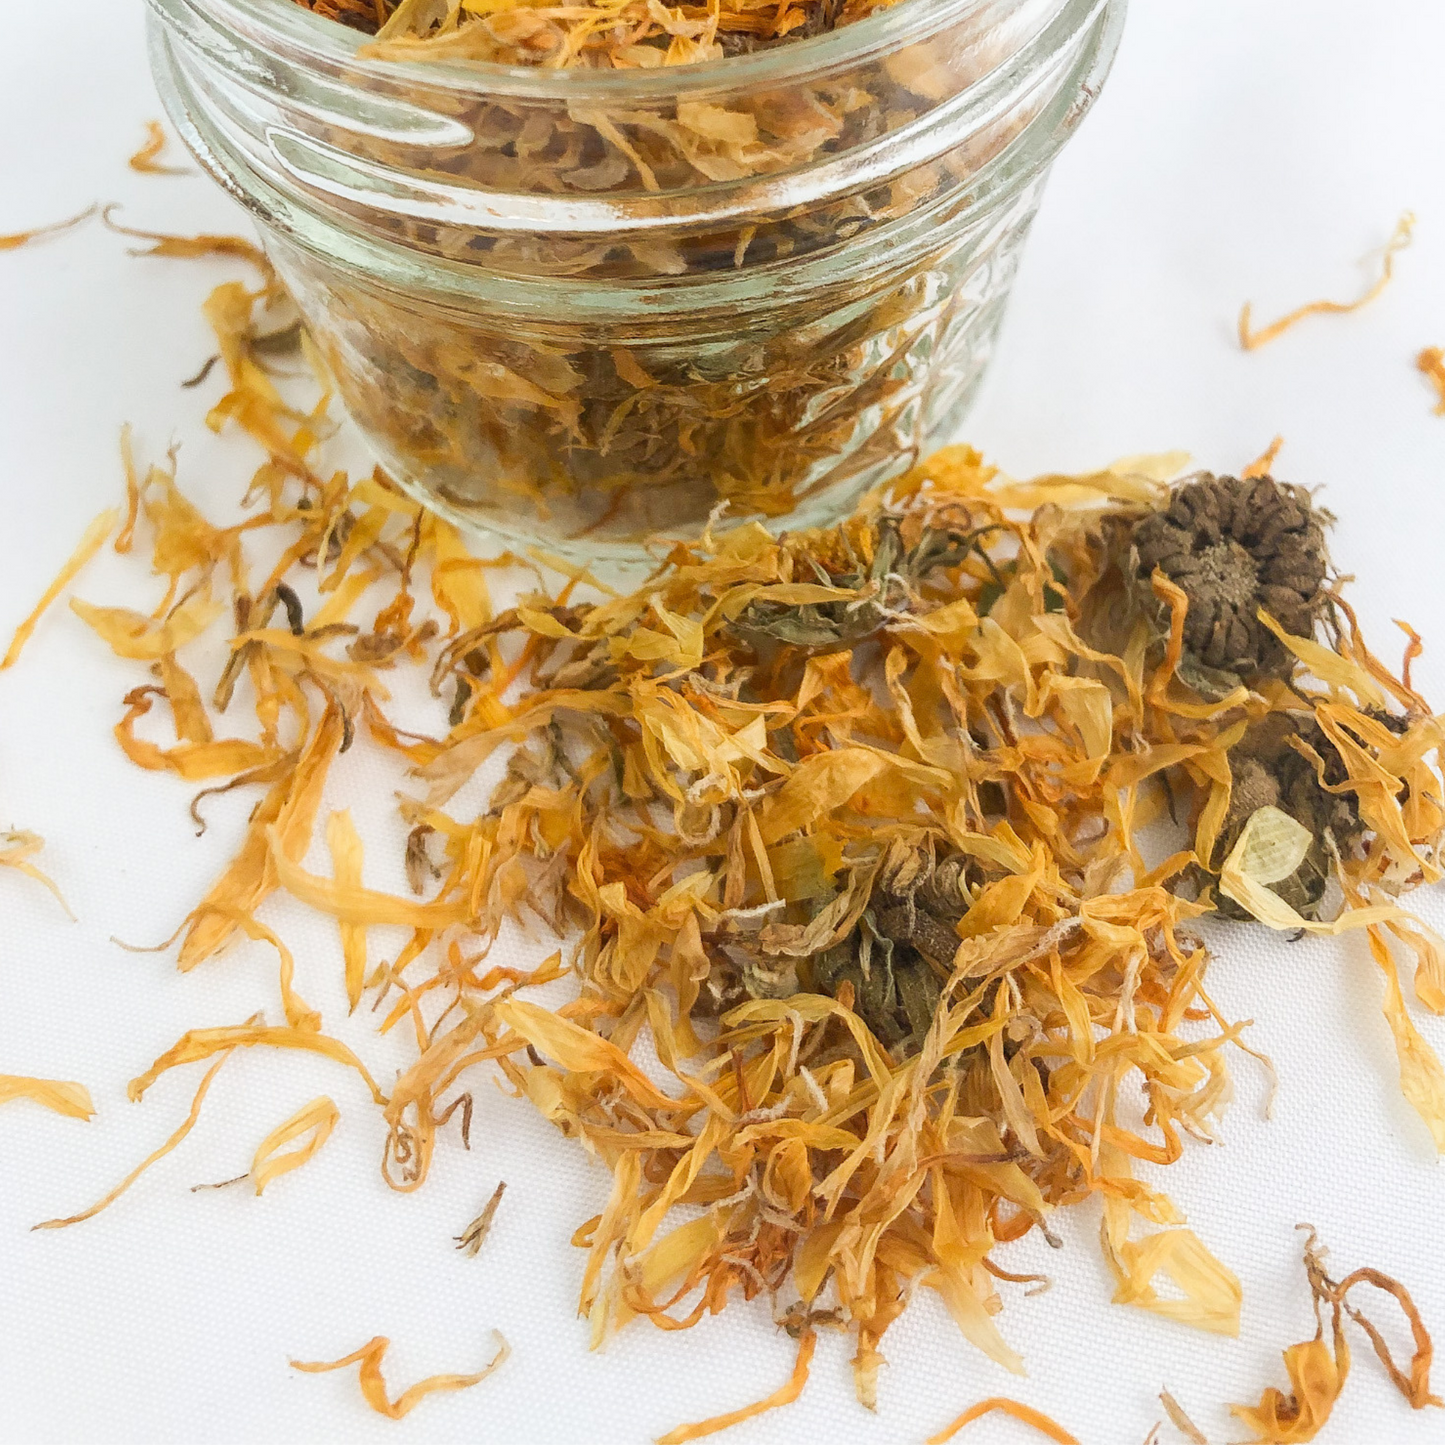 upclose image of dried calendula spilling out of clear glass jar with white background